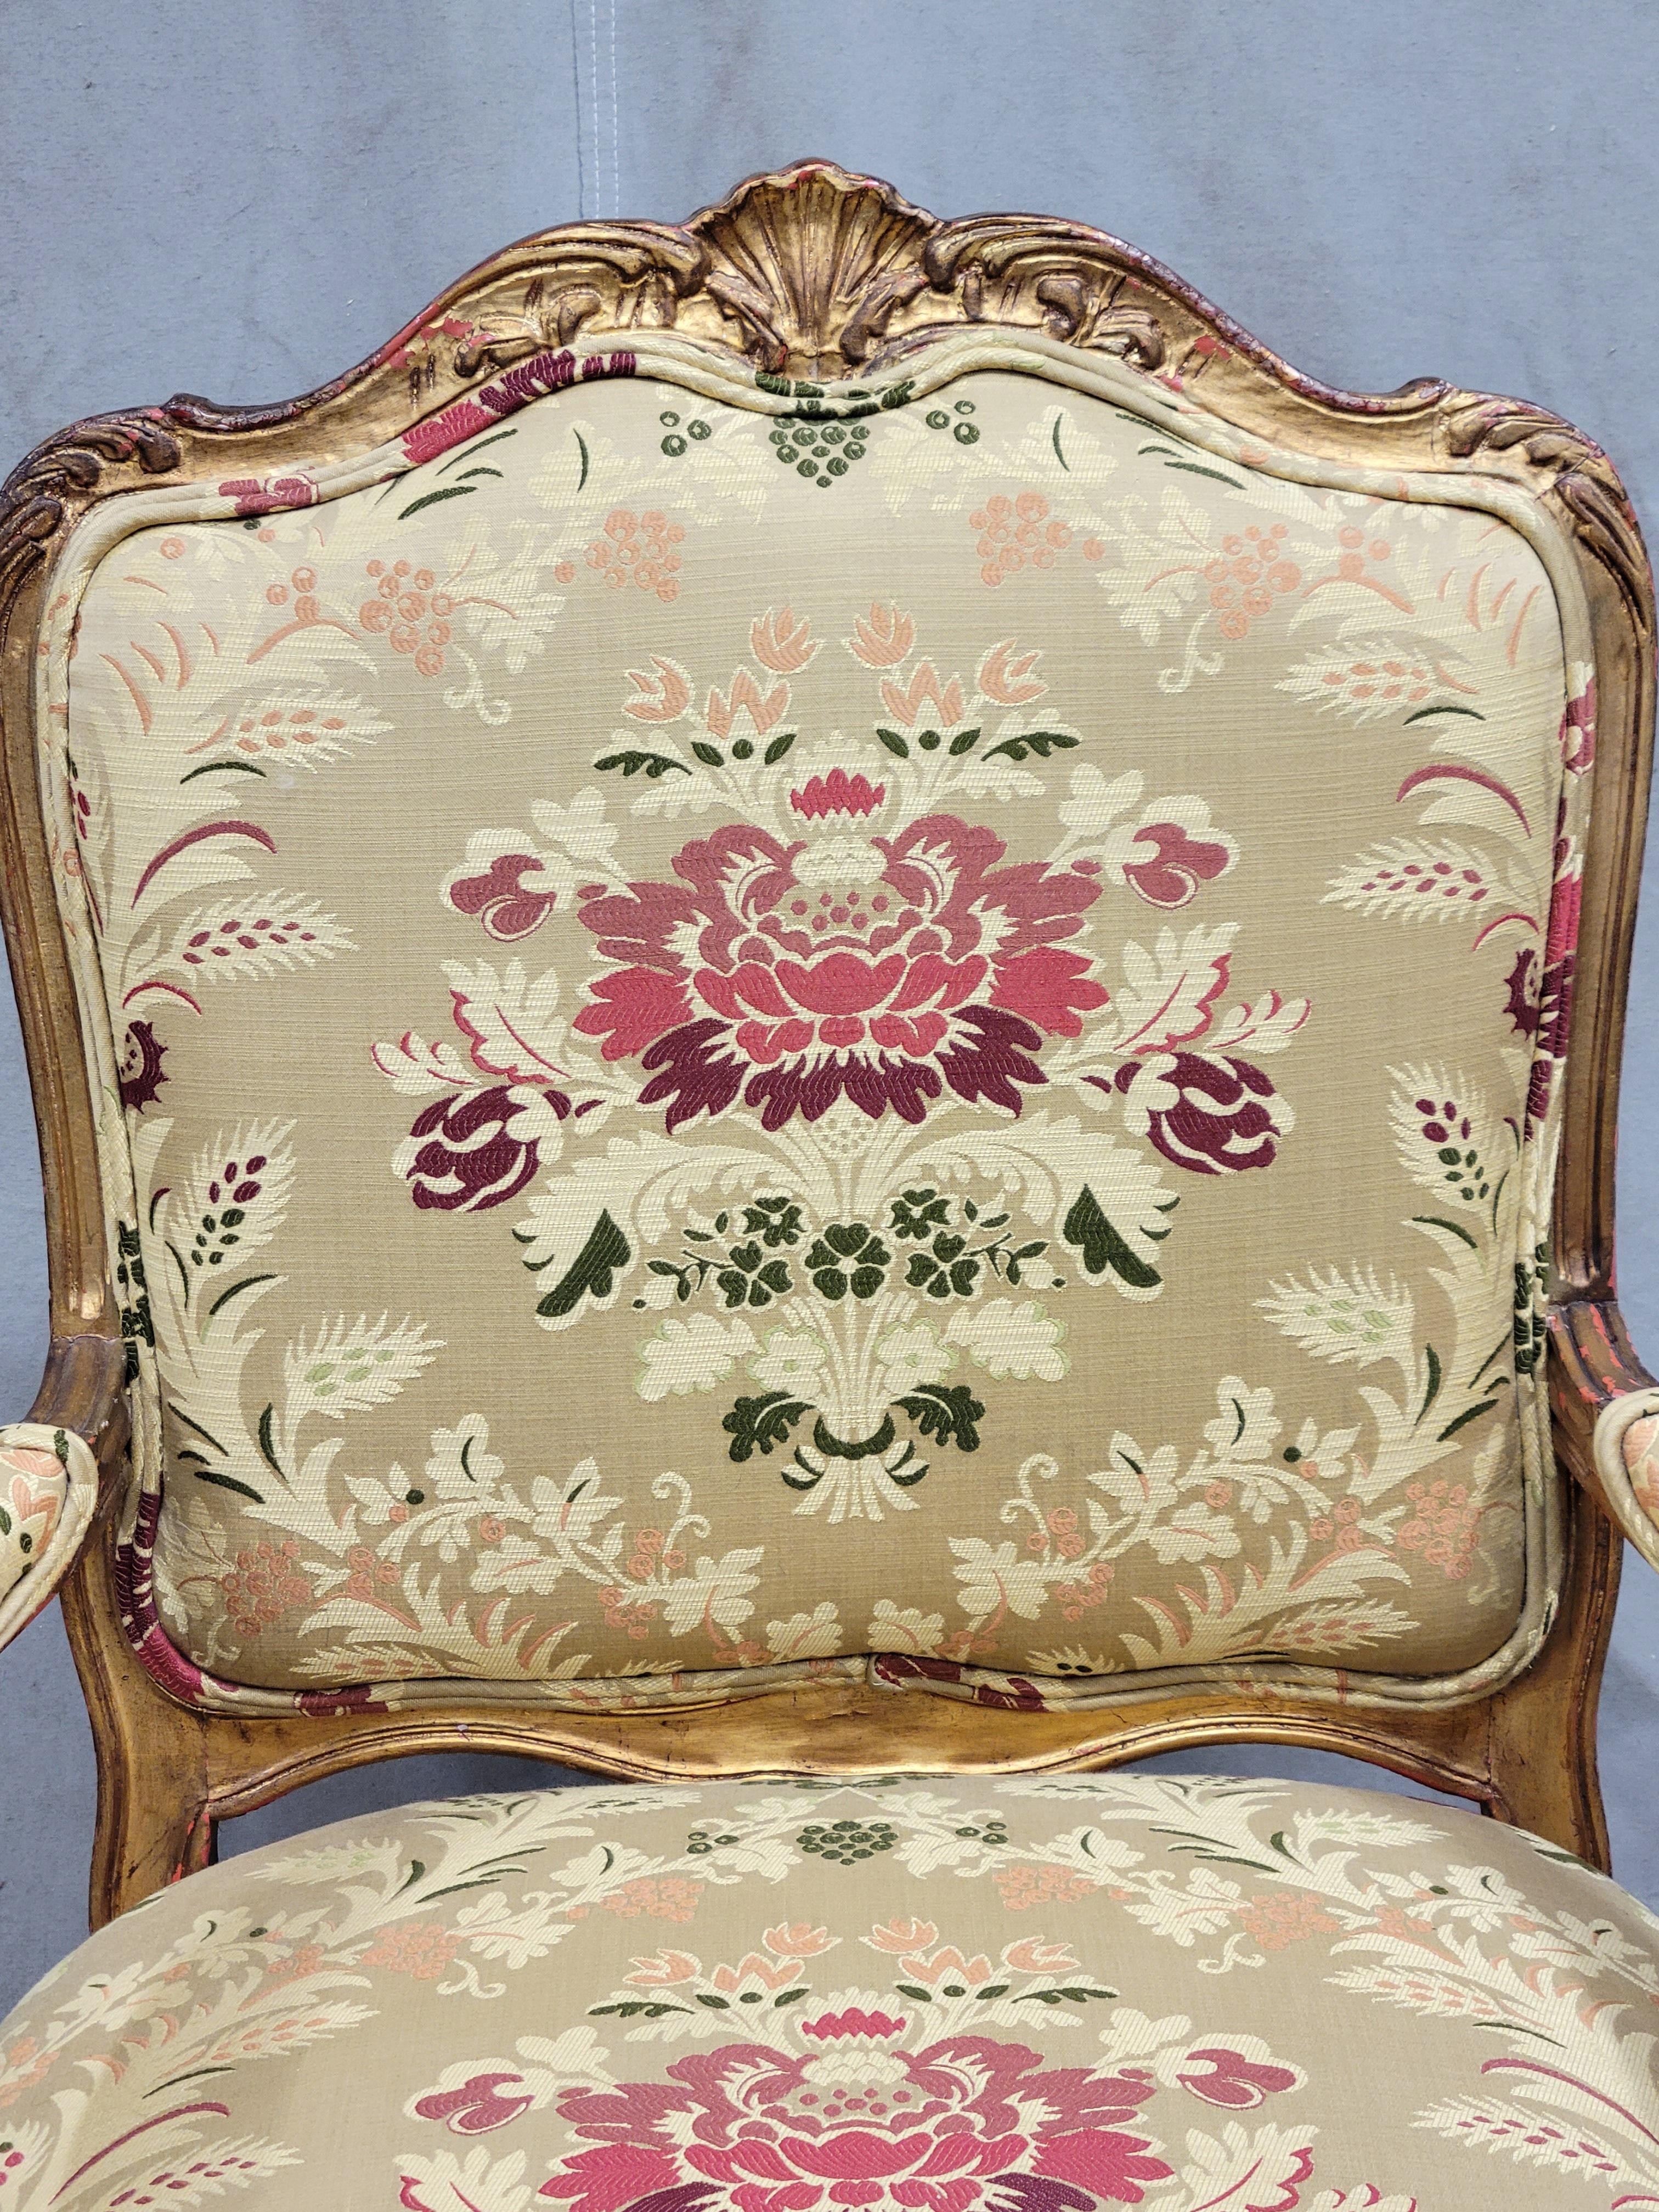 20th Century Vintage French Gold Leaf Bergere Chairs With Designer Damask Upholstery - a Pair